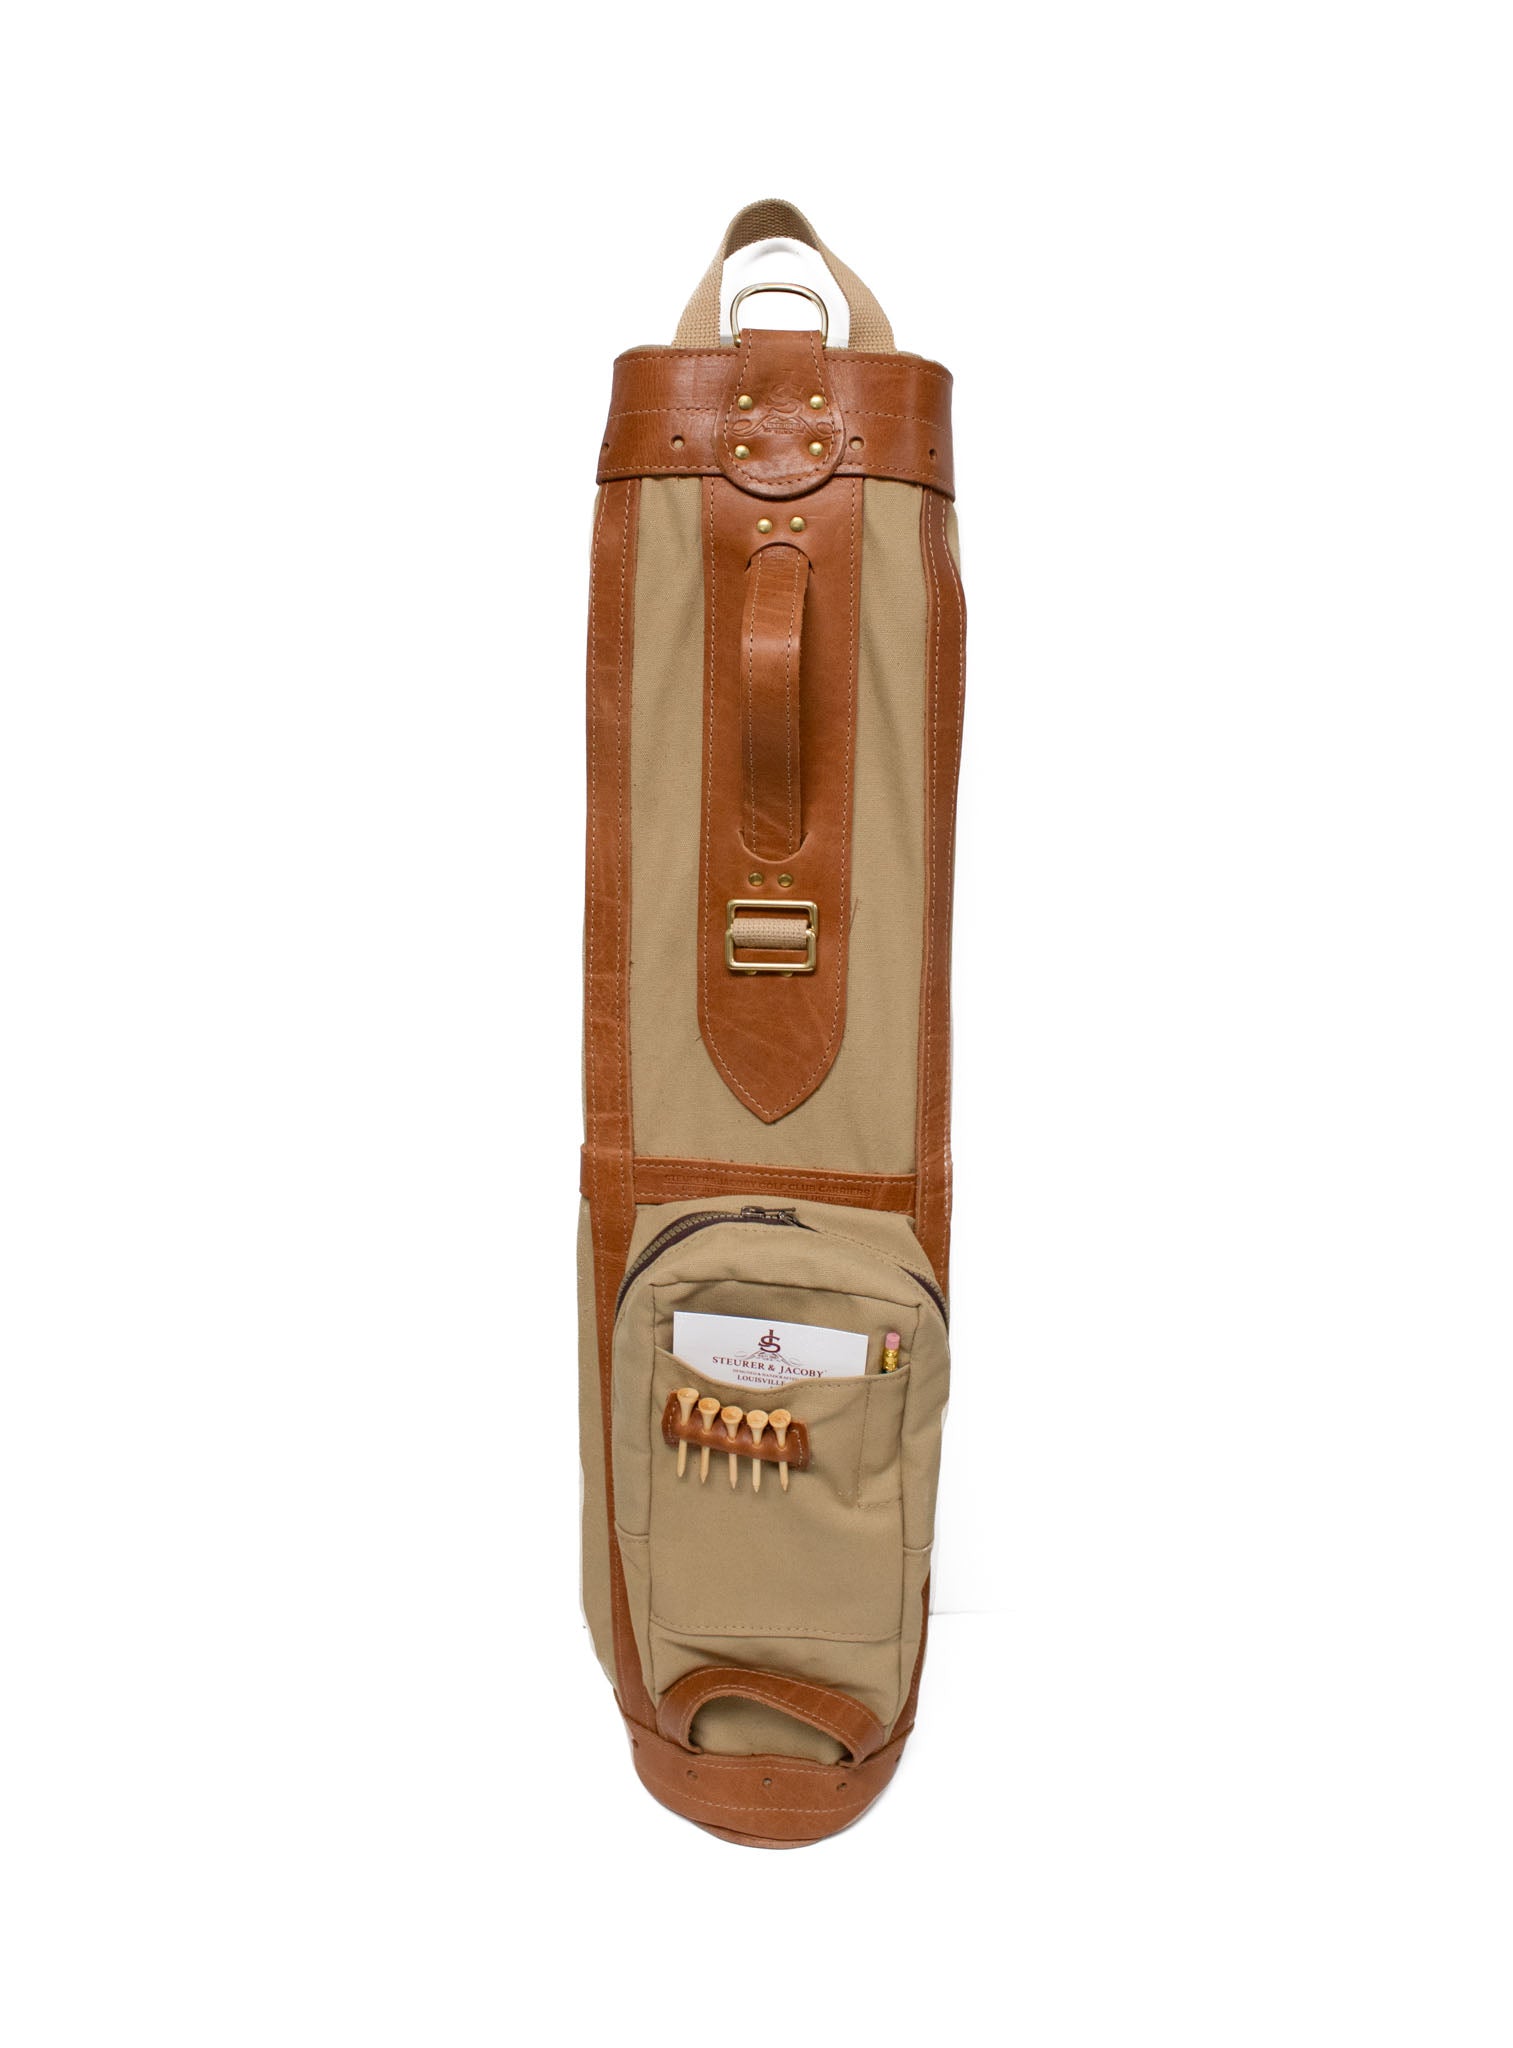 Pencil Style Golf Bag- British Tan with Natural Leather